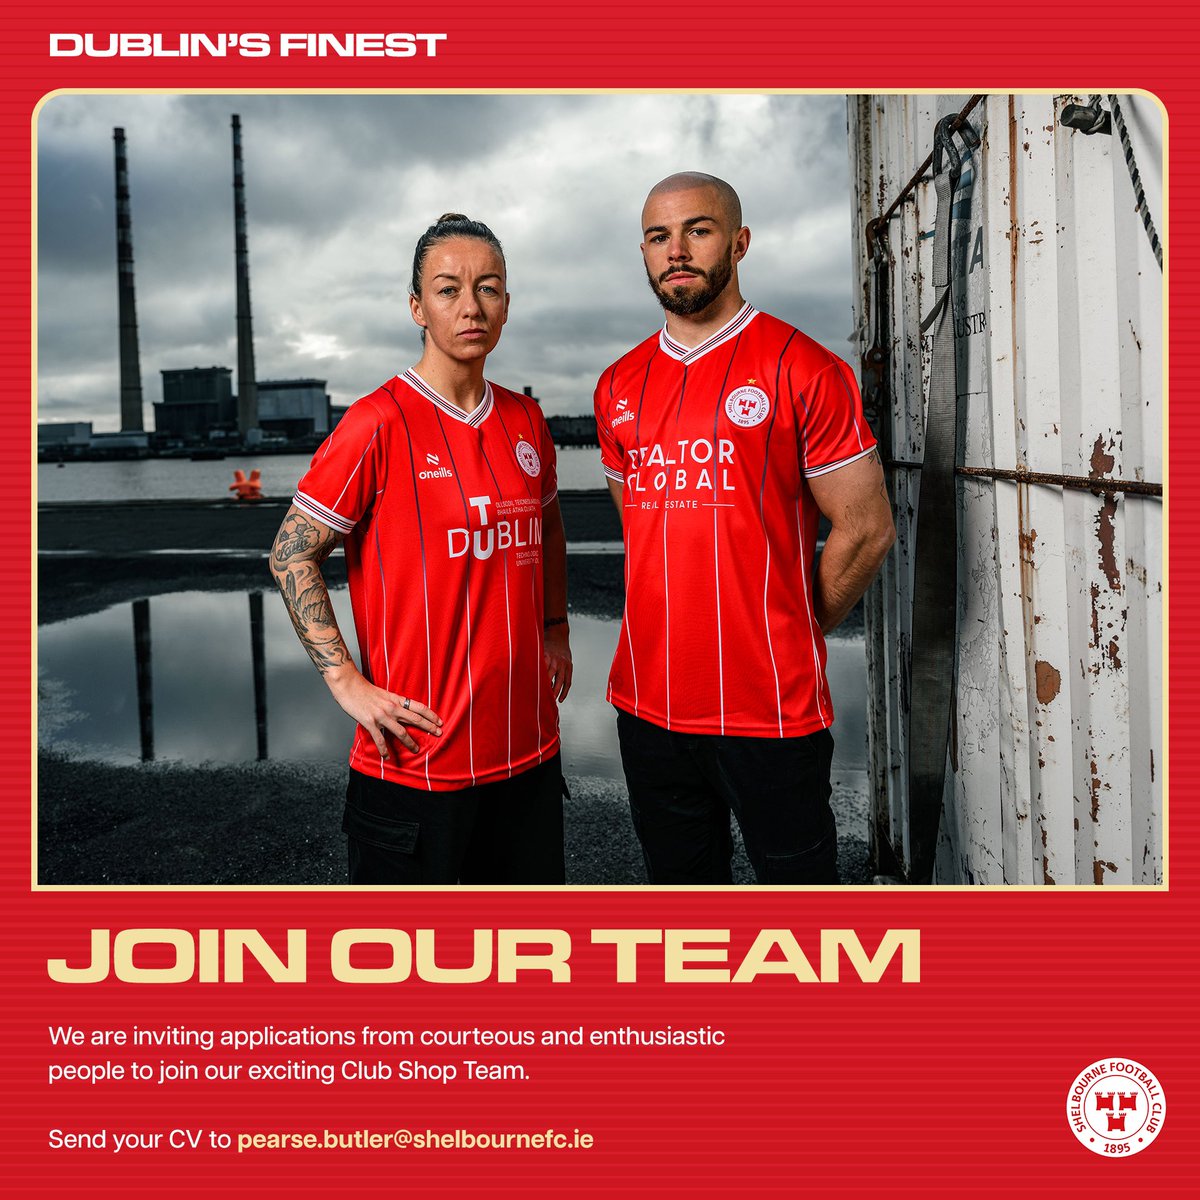 𝗝𝗼𝗶𝗻 𝗼𝘂𝗿 𝘁𝗲𝗮𝗺 💪🏻 We couldn’t function without our volunteers at Shelbourne FC. With the growth of our online and in-store retail platforms, we are seeking new volunteers to join our team. If you’d like to help send your CV to pearse.butler@shelbournefc.ie